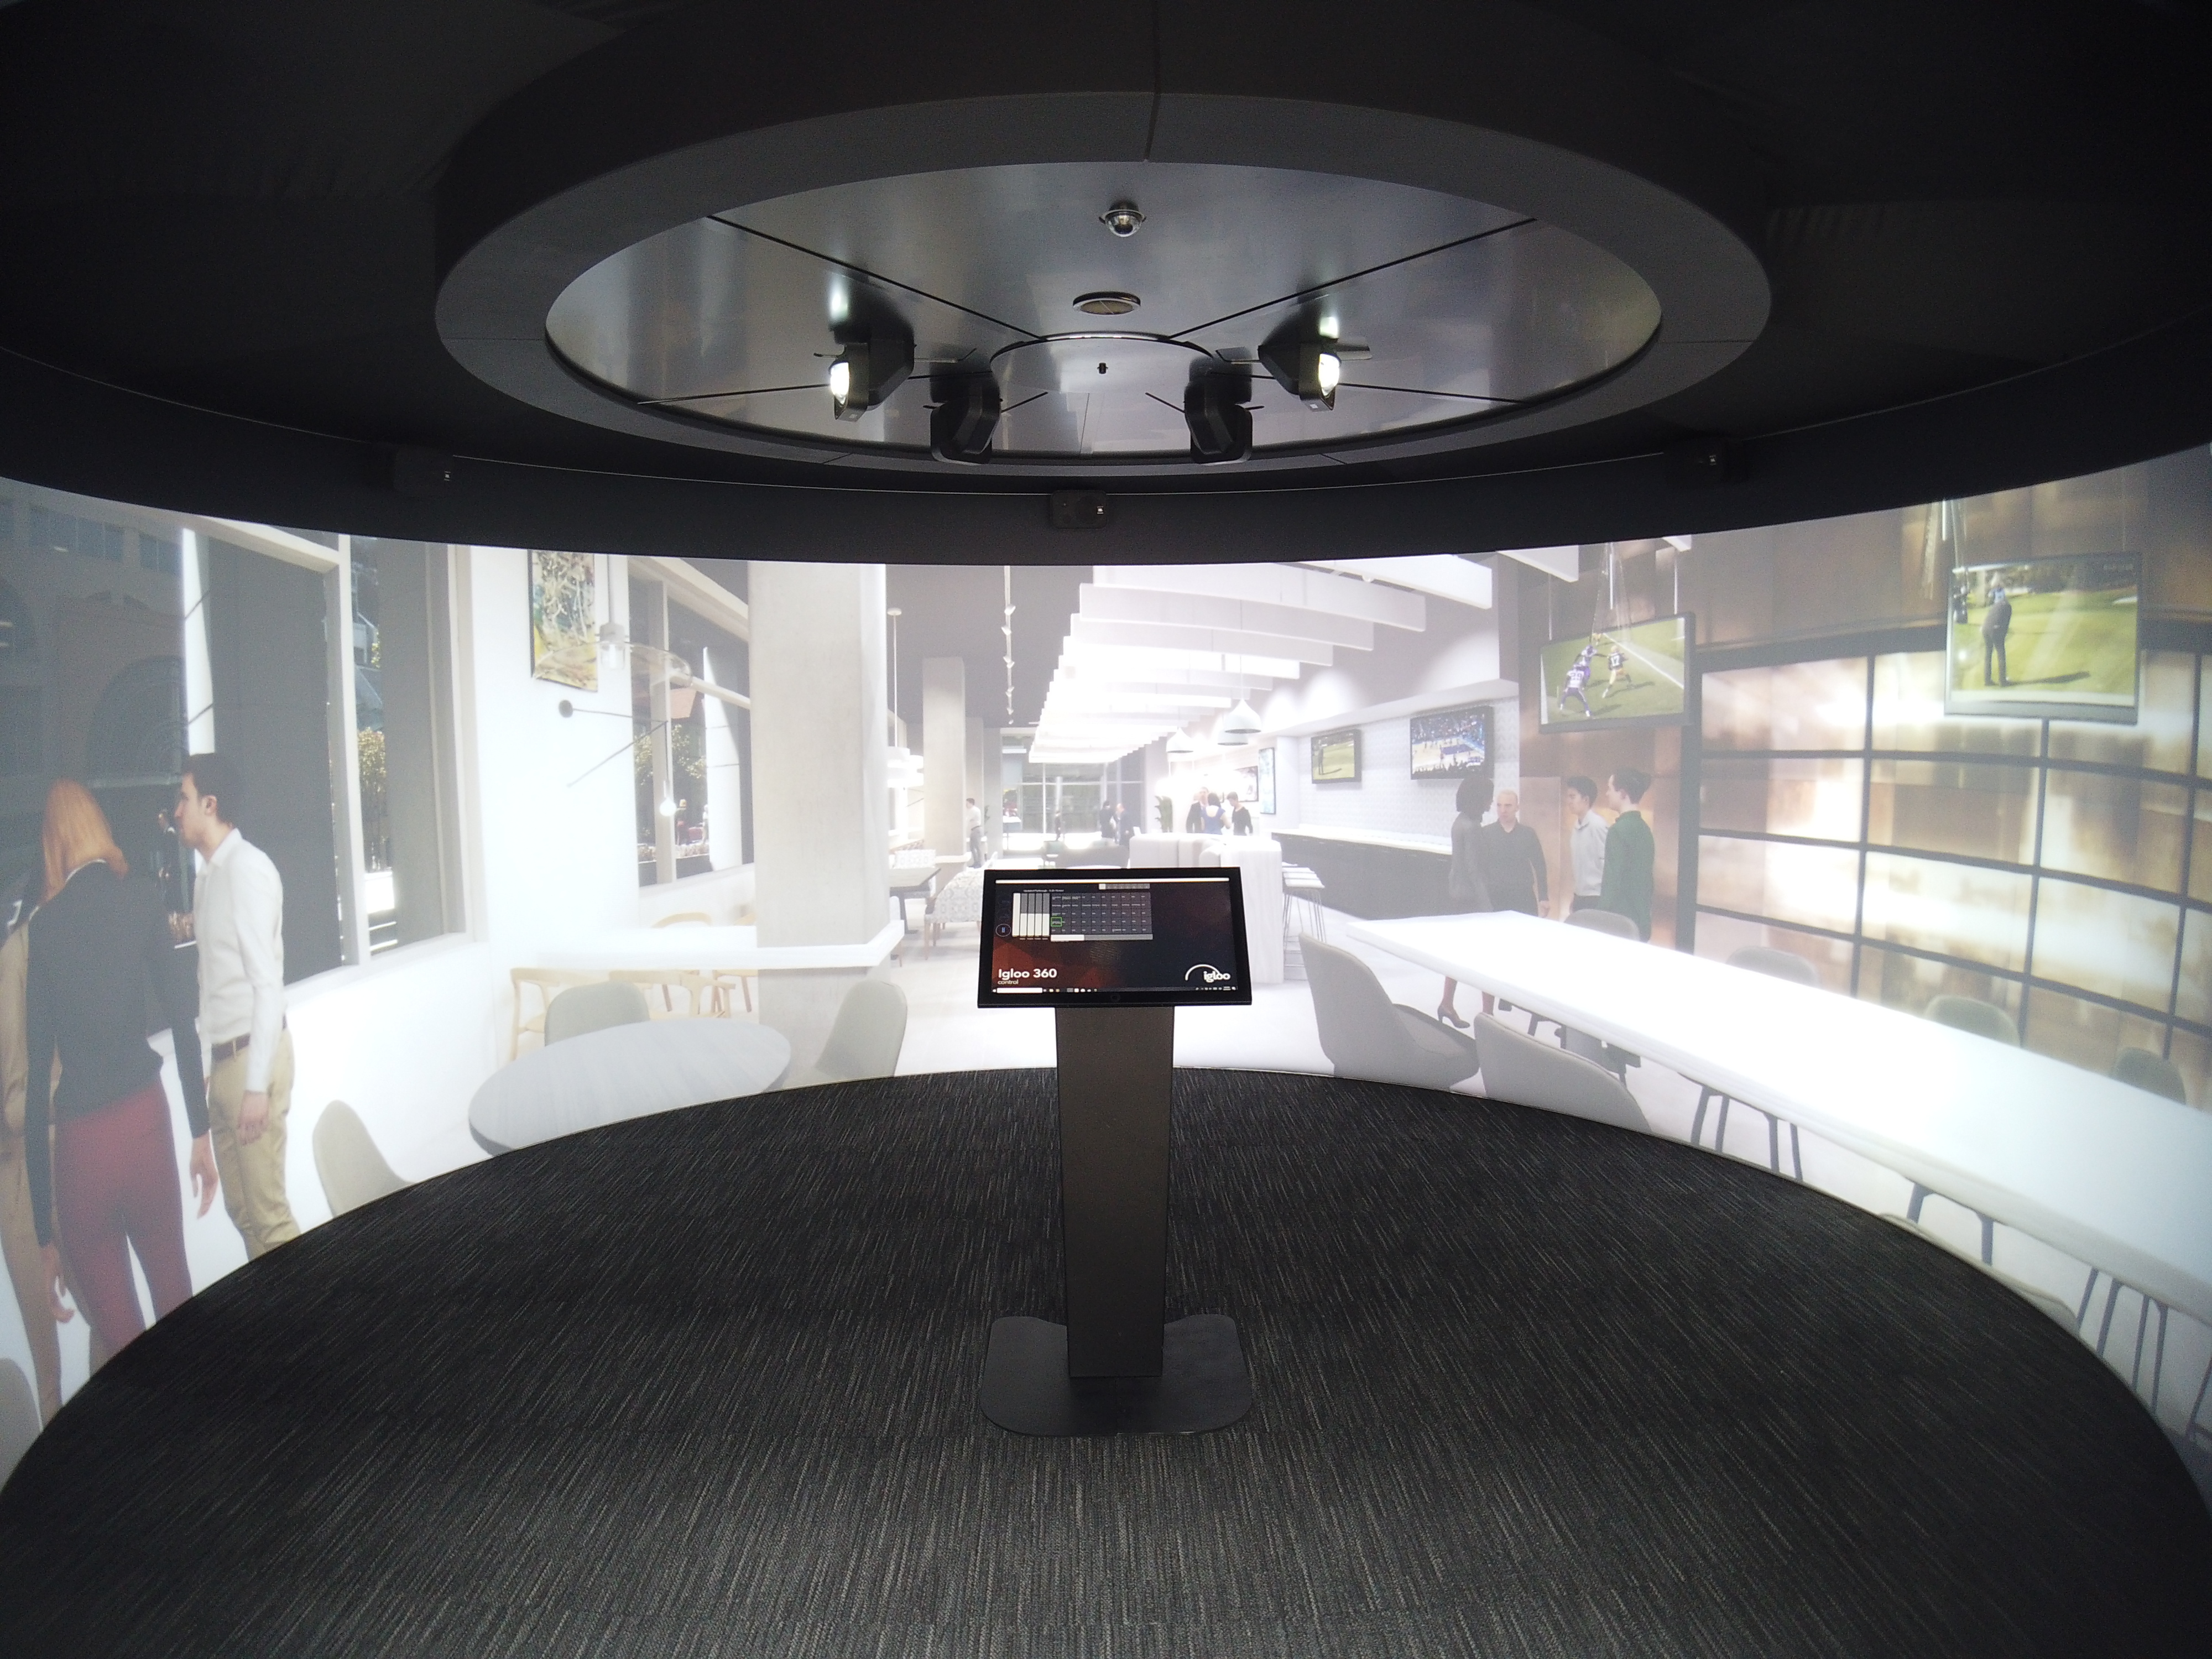 Large projection of a room on Igloo technology with control panel in the centre.